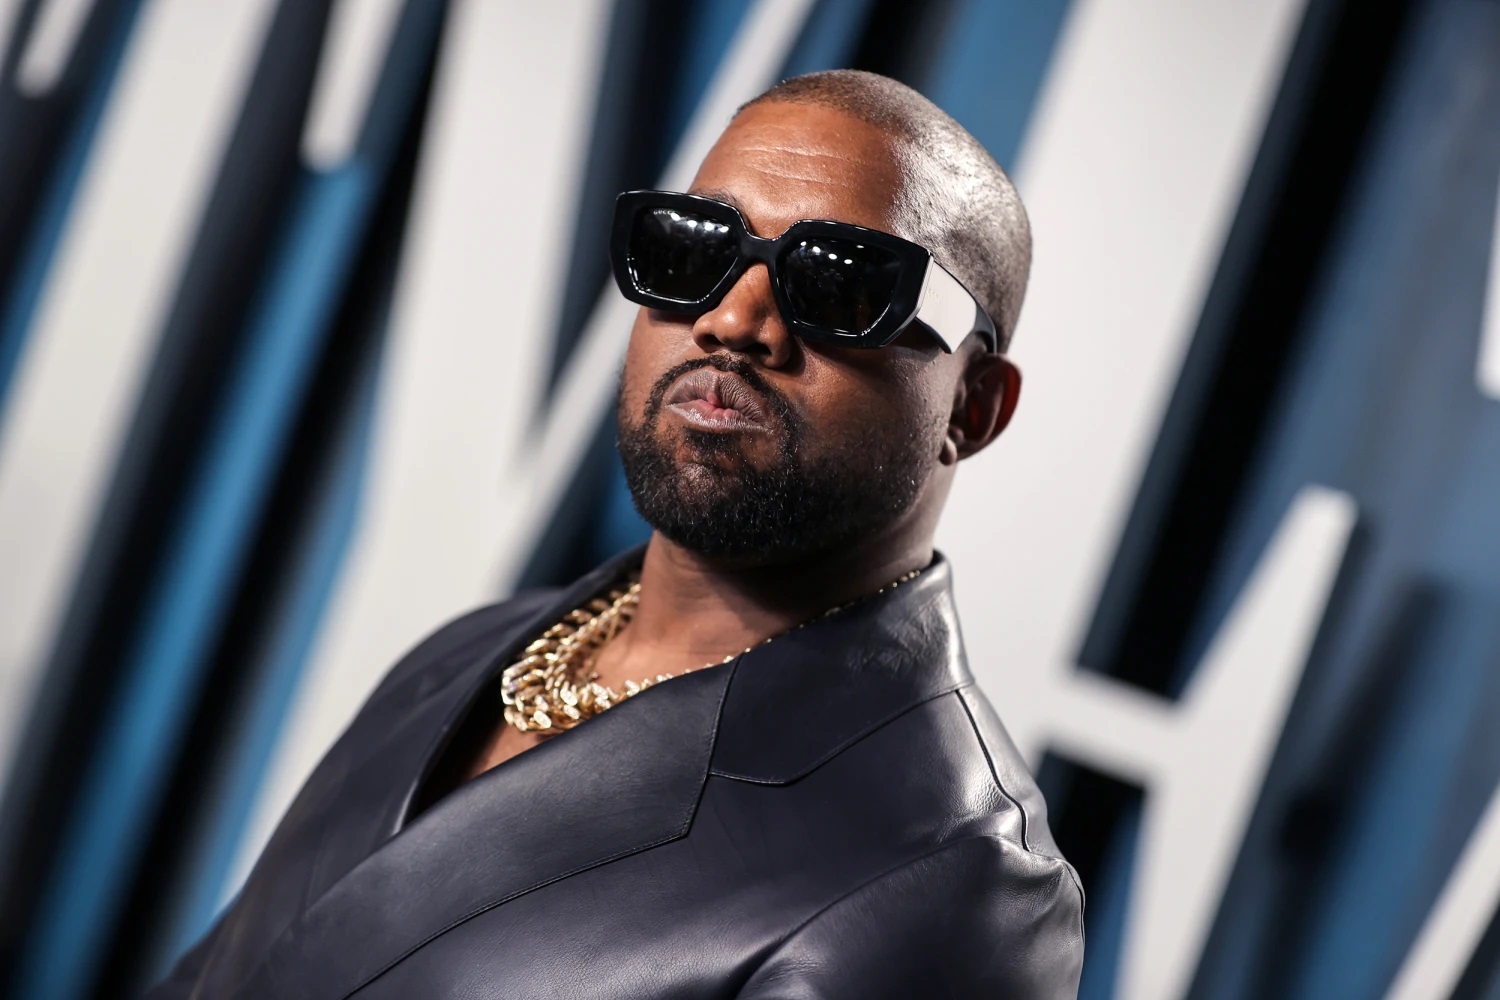 Kanye West Sparks Controversy With AI-Like Apology For Antisemitic Rants